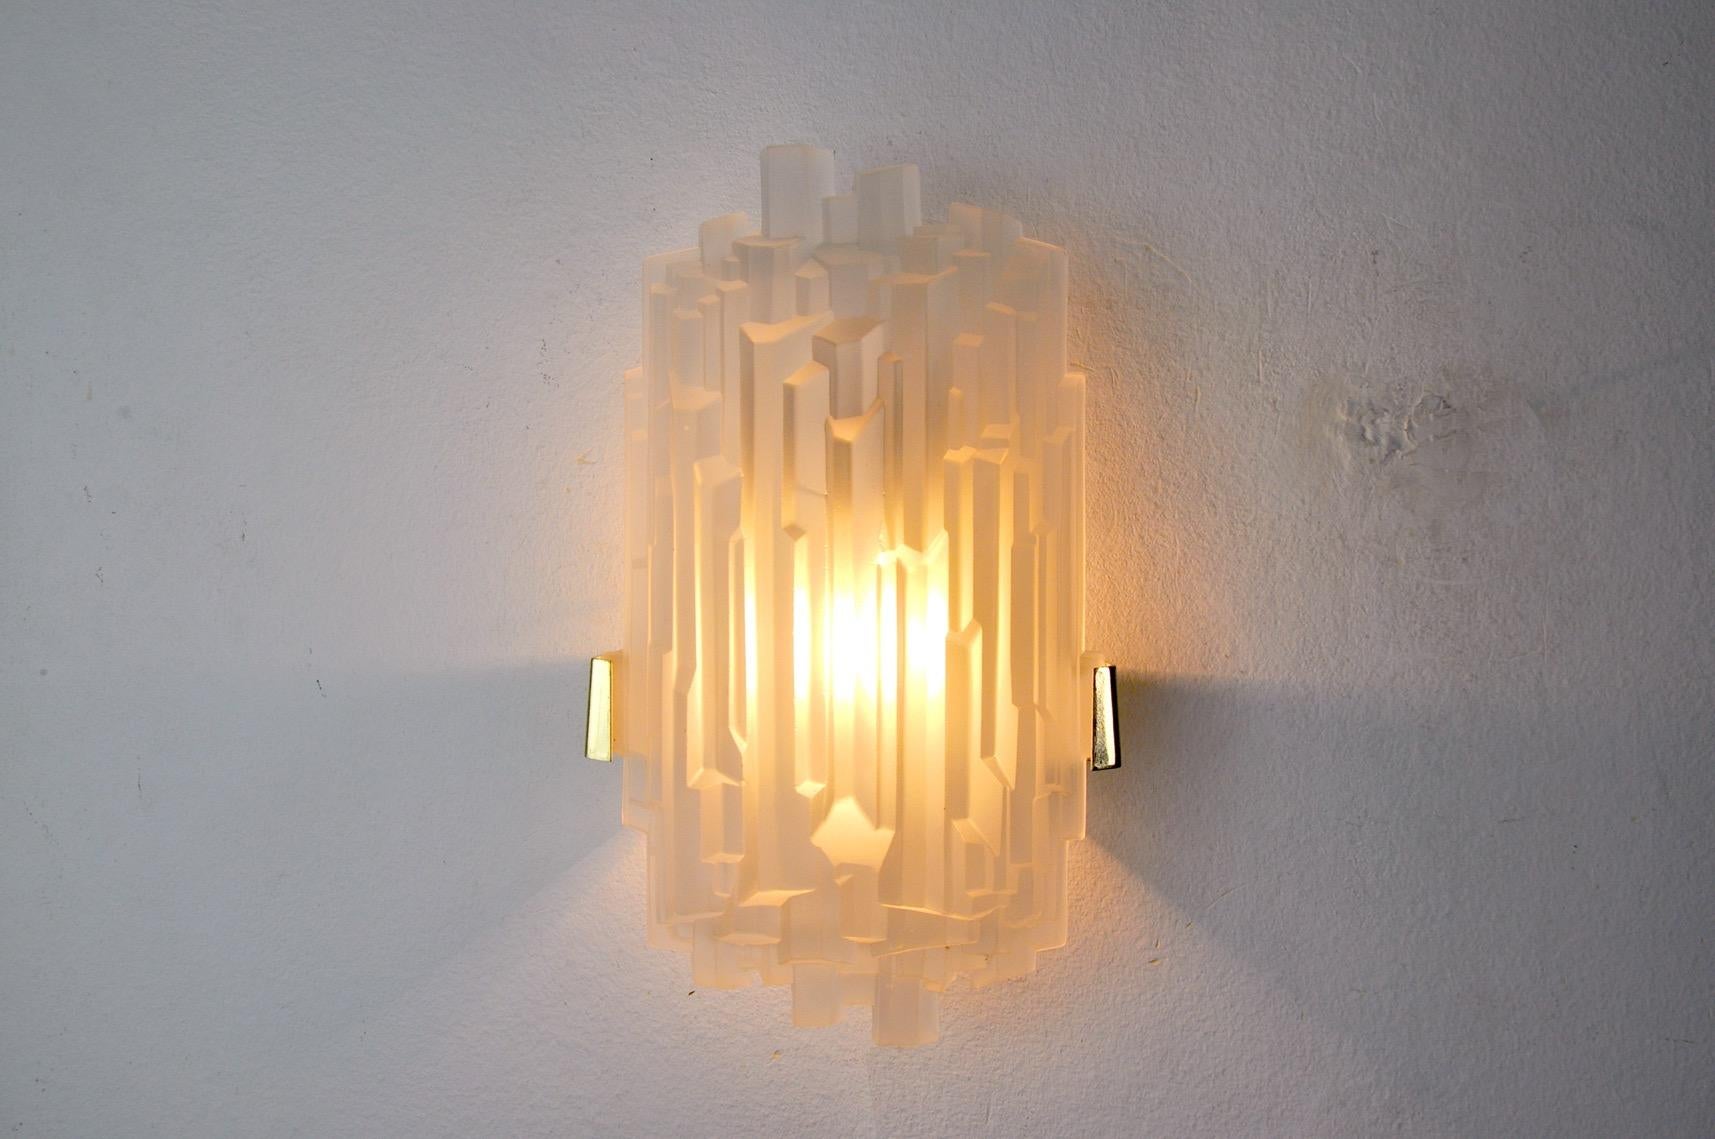 Superb frosted wall lamp, designed and produced by j.t kalmar in austria in the 1970s.

This wall lamp will bring a real touch of design to your interior.

Electricity checked, good state of conservation, crystals in perfect condition. We adapt